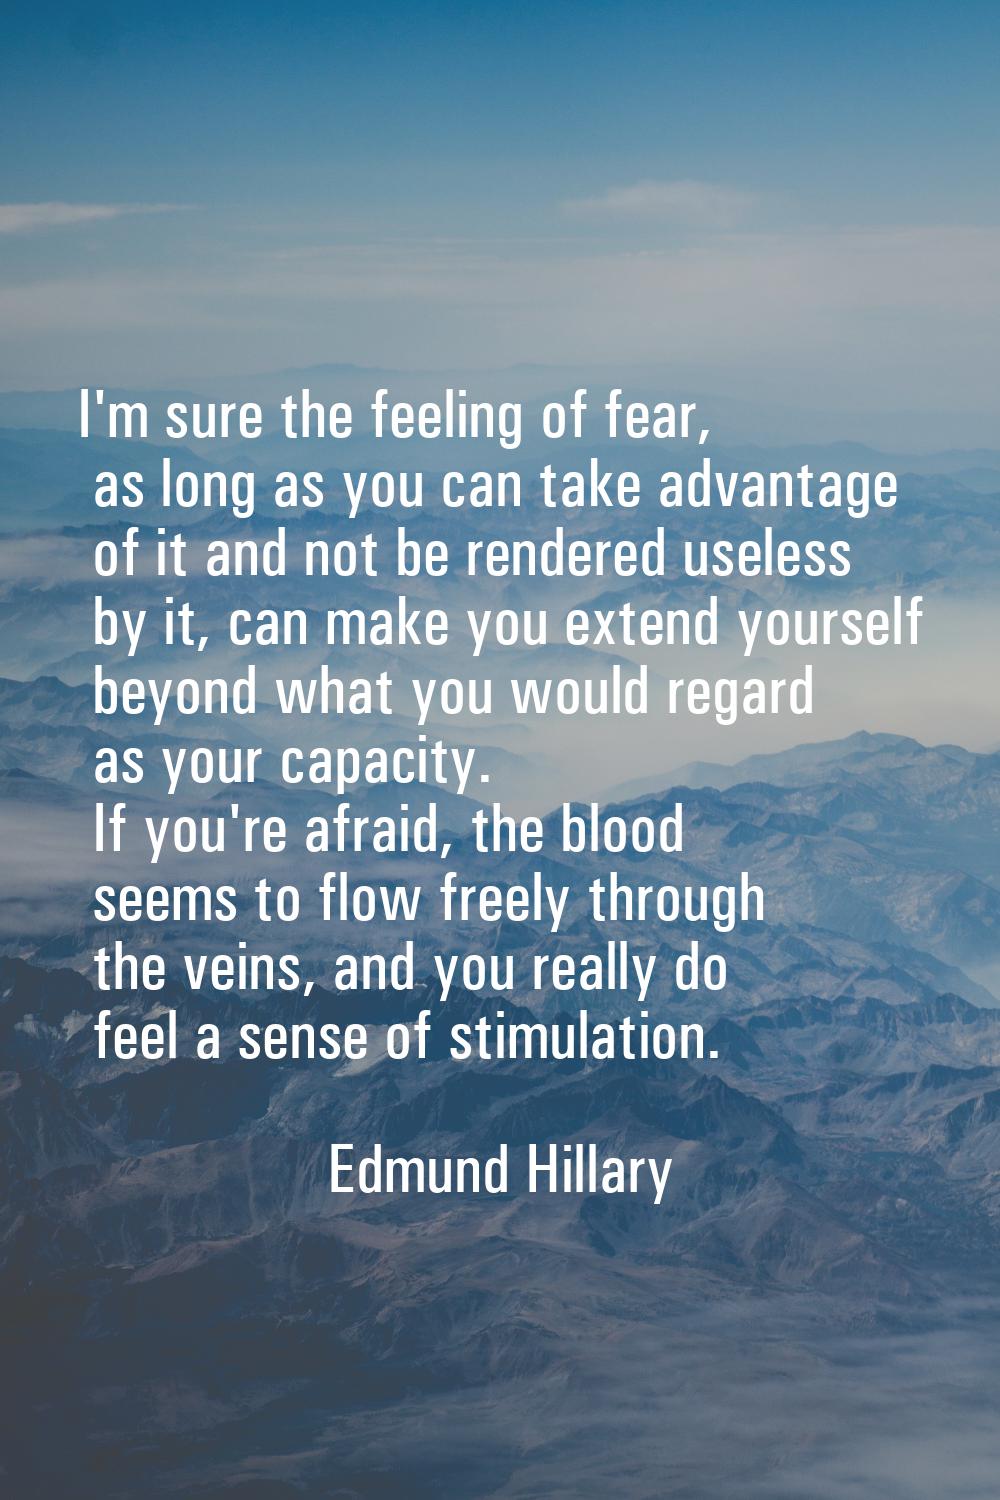 I'm sure the feeling of fear, as long as you can take advantage of it and not be rendered useless b